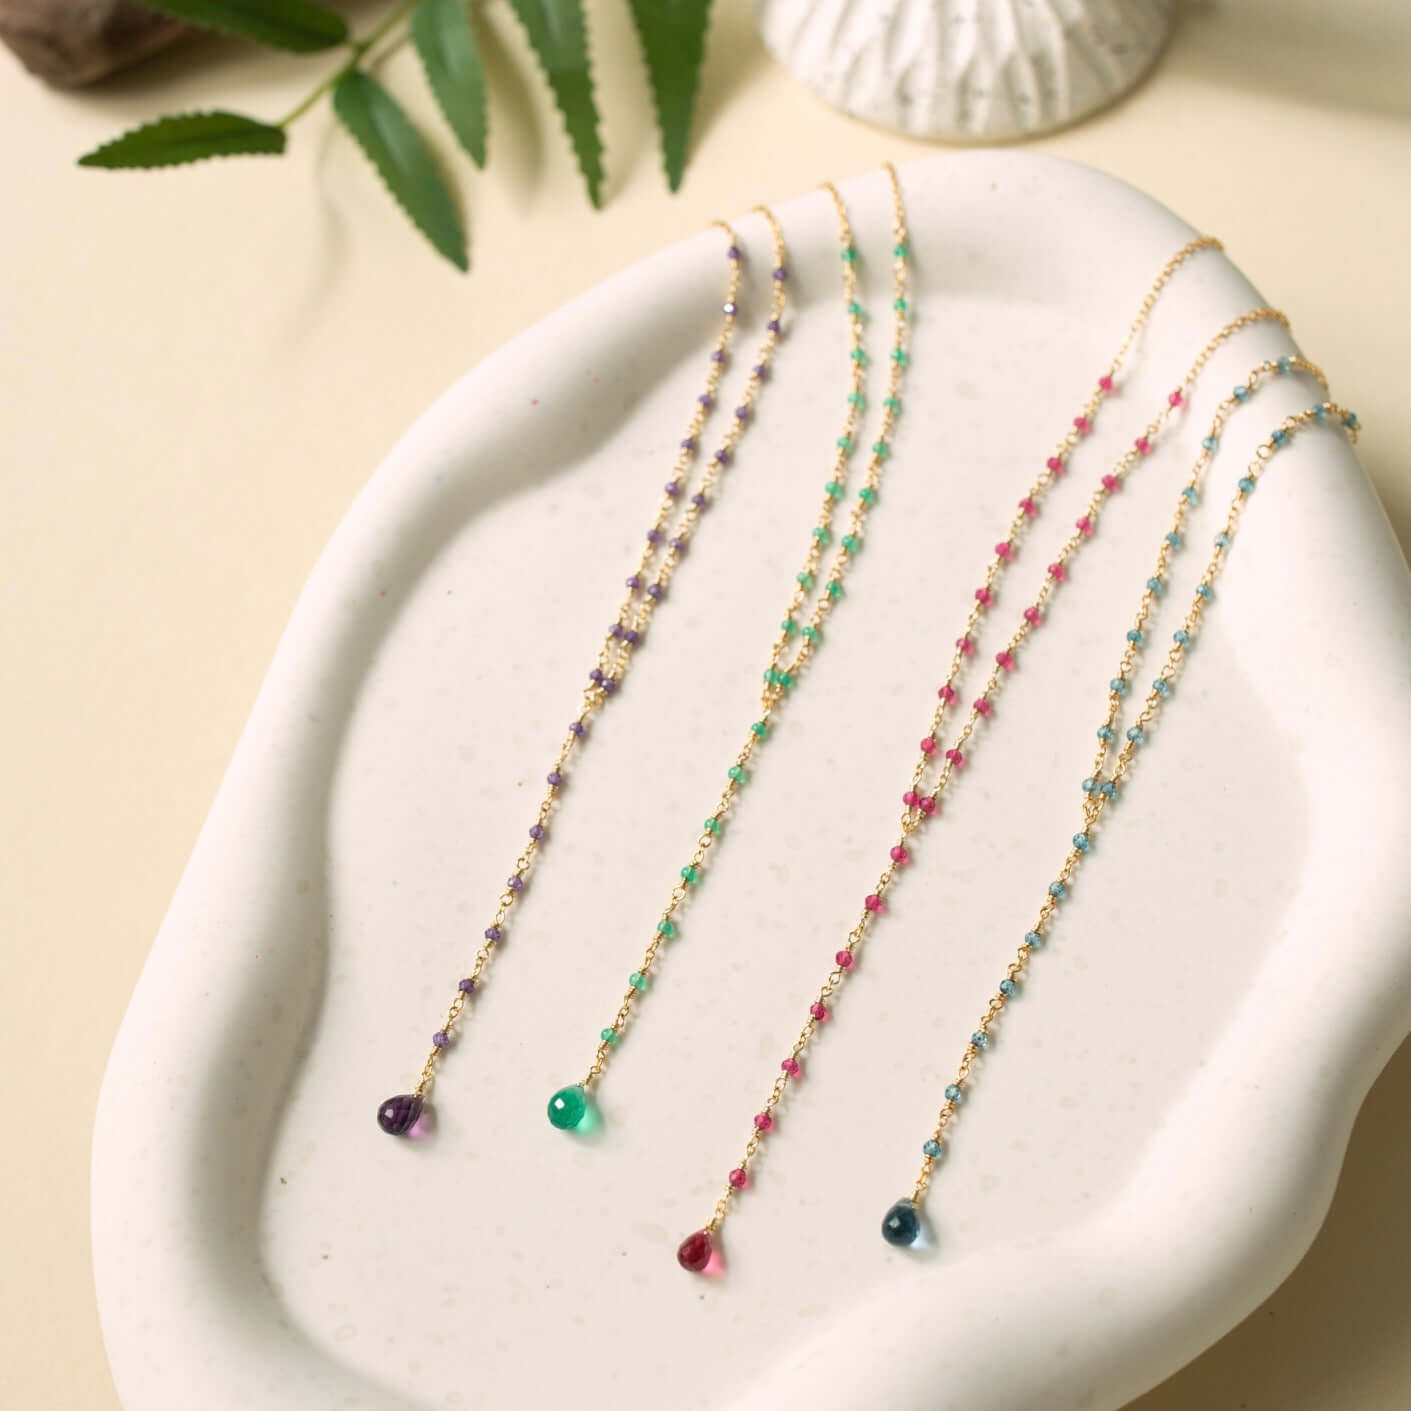 Casually arranged on clay plates, necklaces in lolite, amethyst, pink tourmaline quartz, and green onyx bring a natural charm to the scene